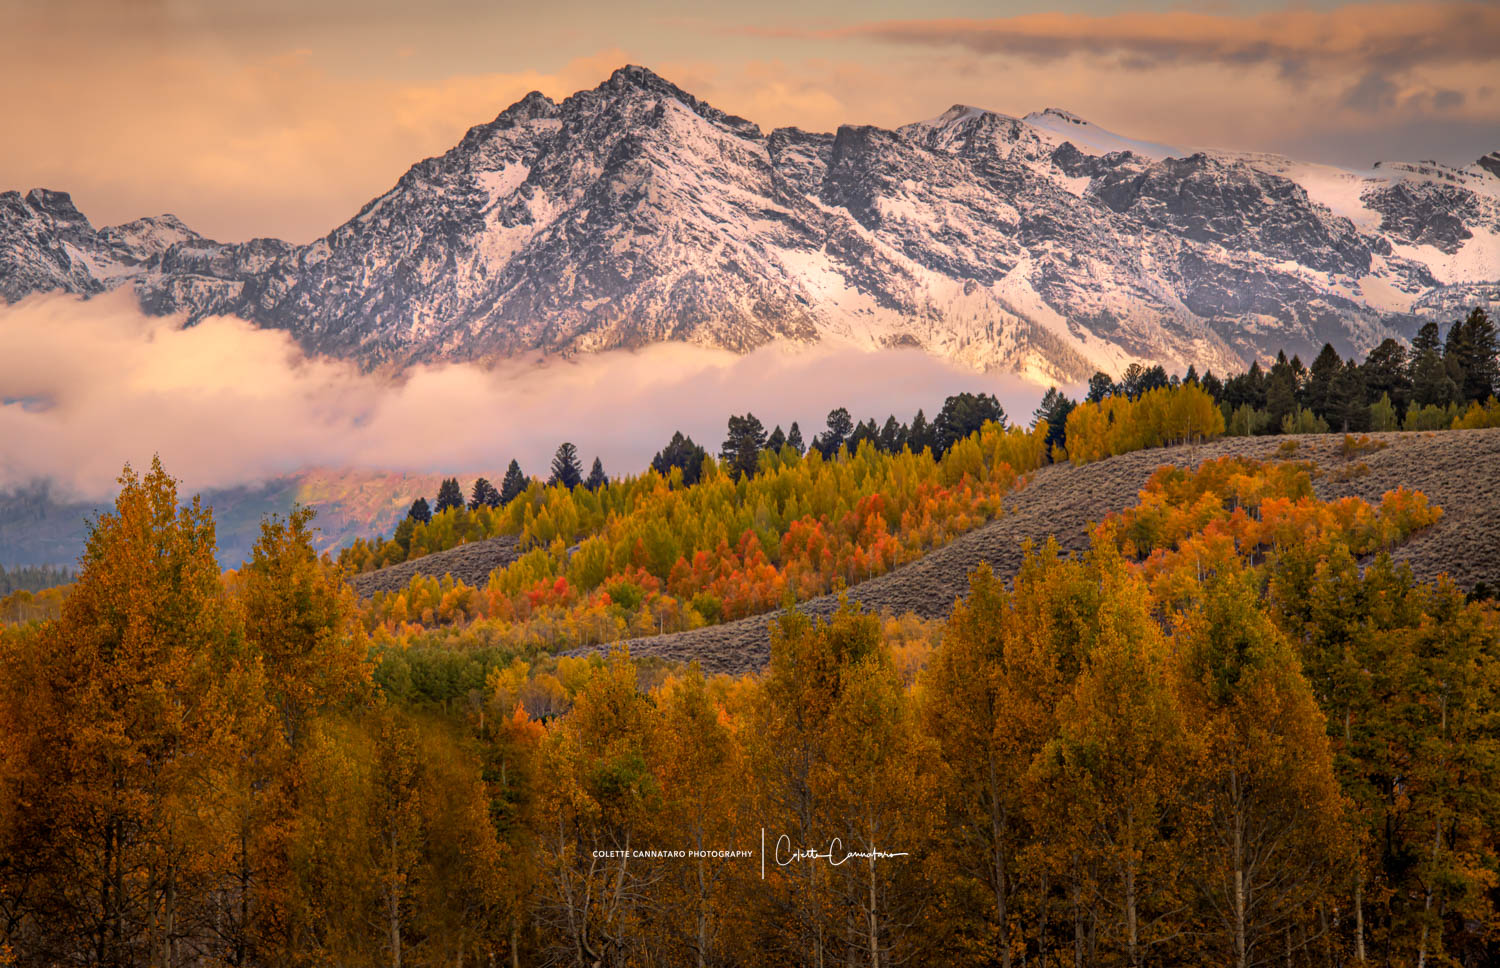 The snow capped mountains of Colorado and the autumn gold aspen trees that form a line